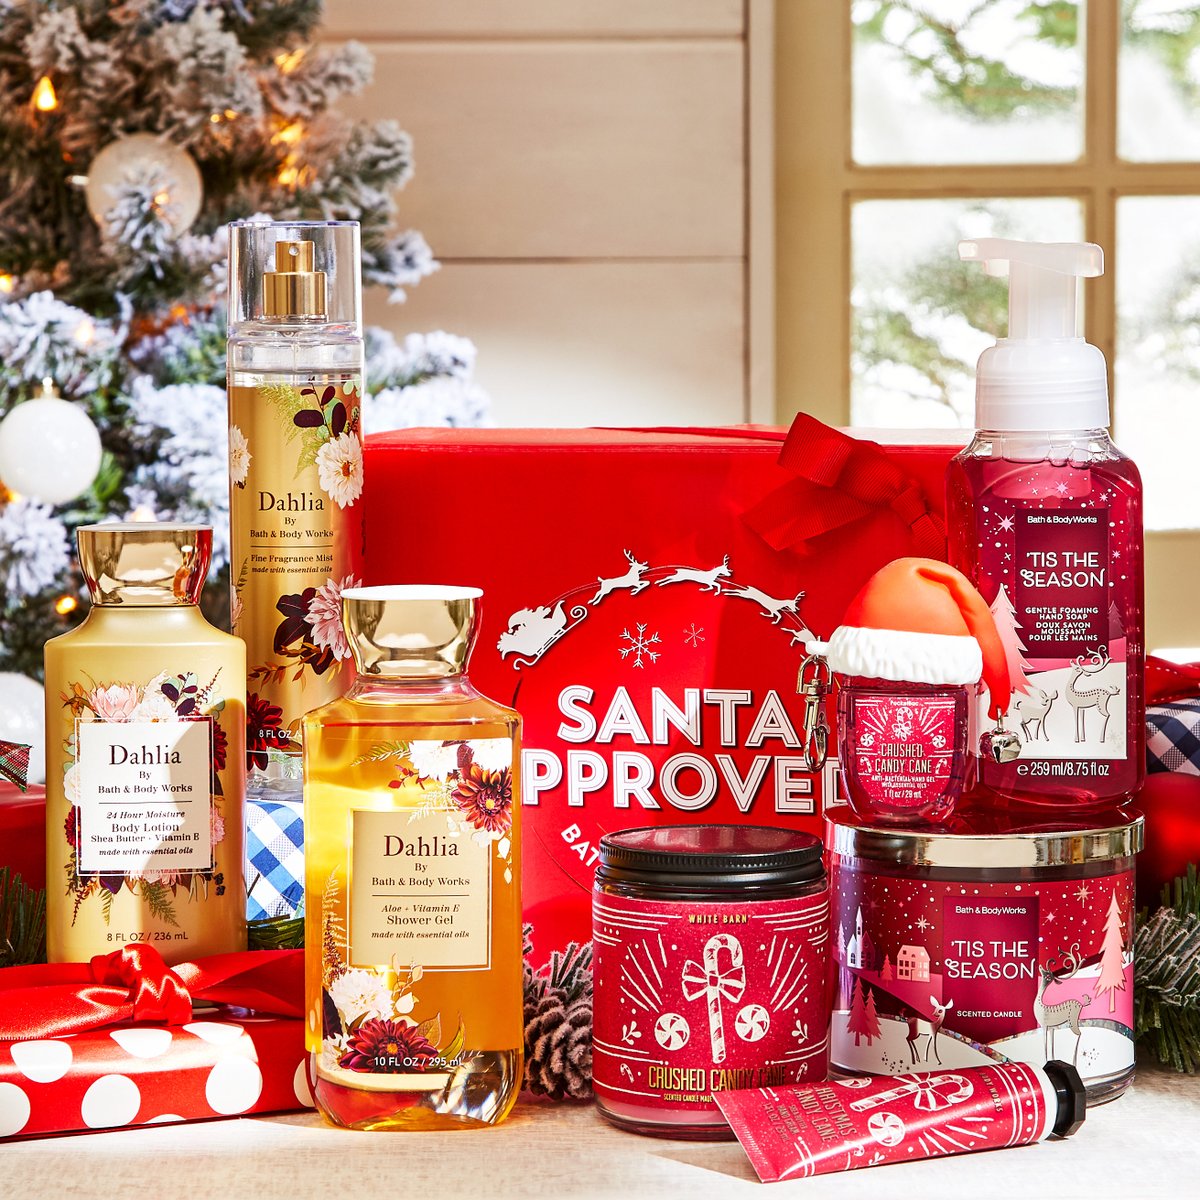 Bath & Body Works Exclusive Black Friday Box is Making a Come Back